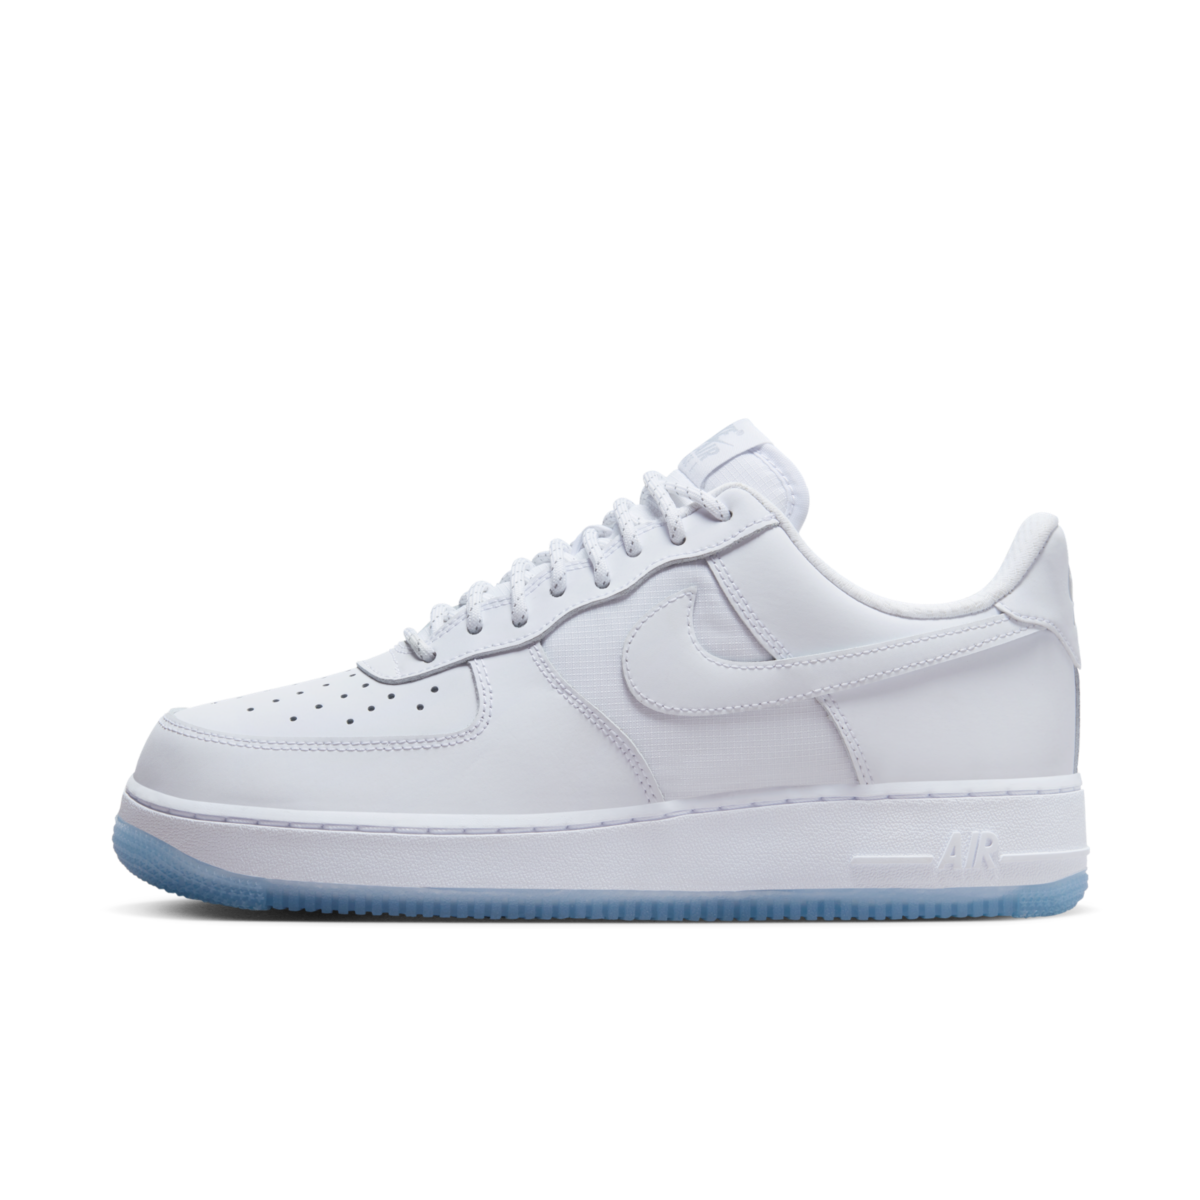 Air Force 1 '07 "White Icy Blue"